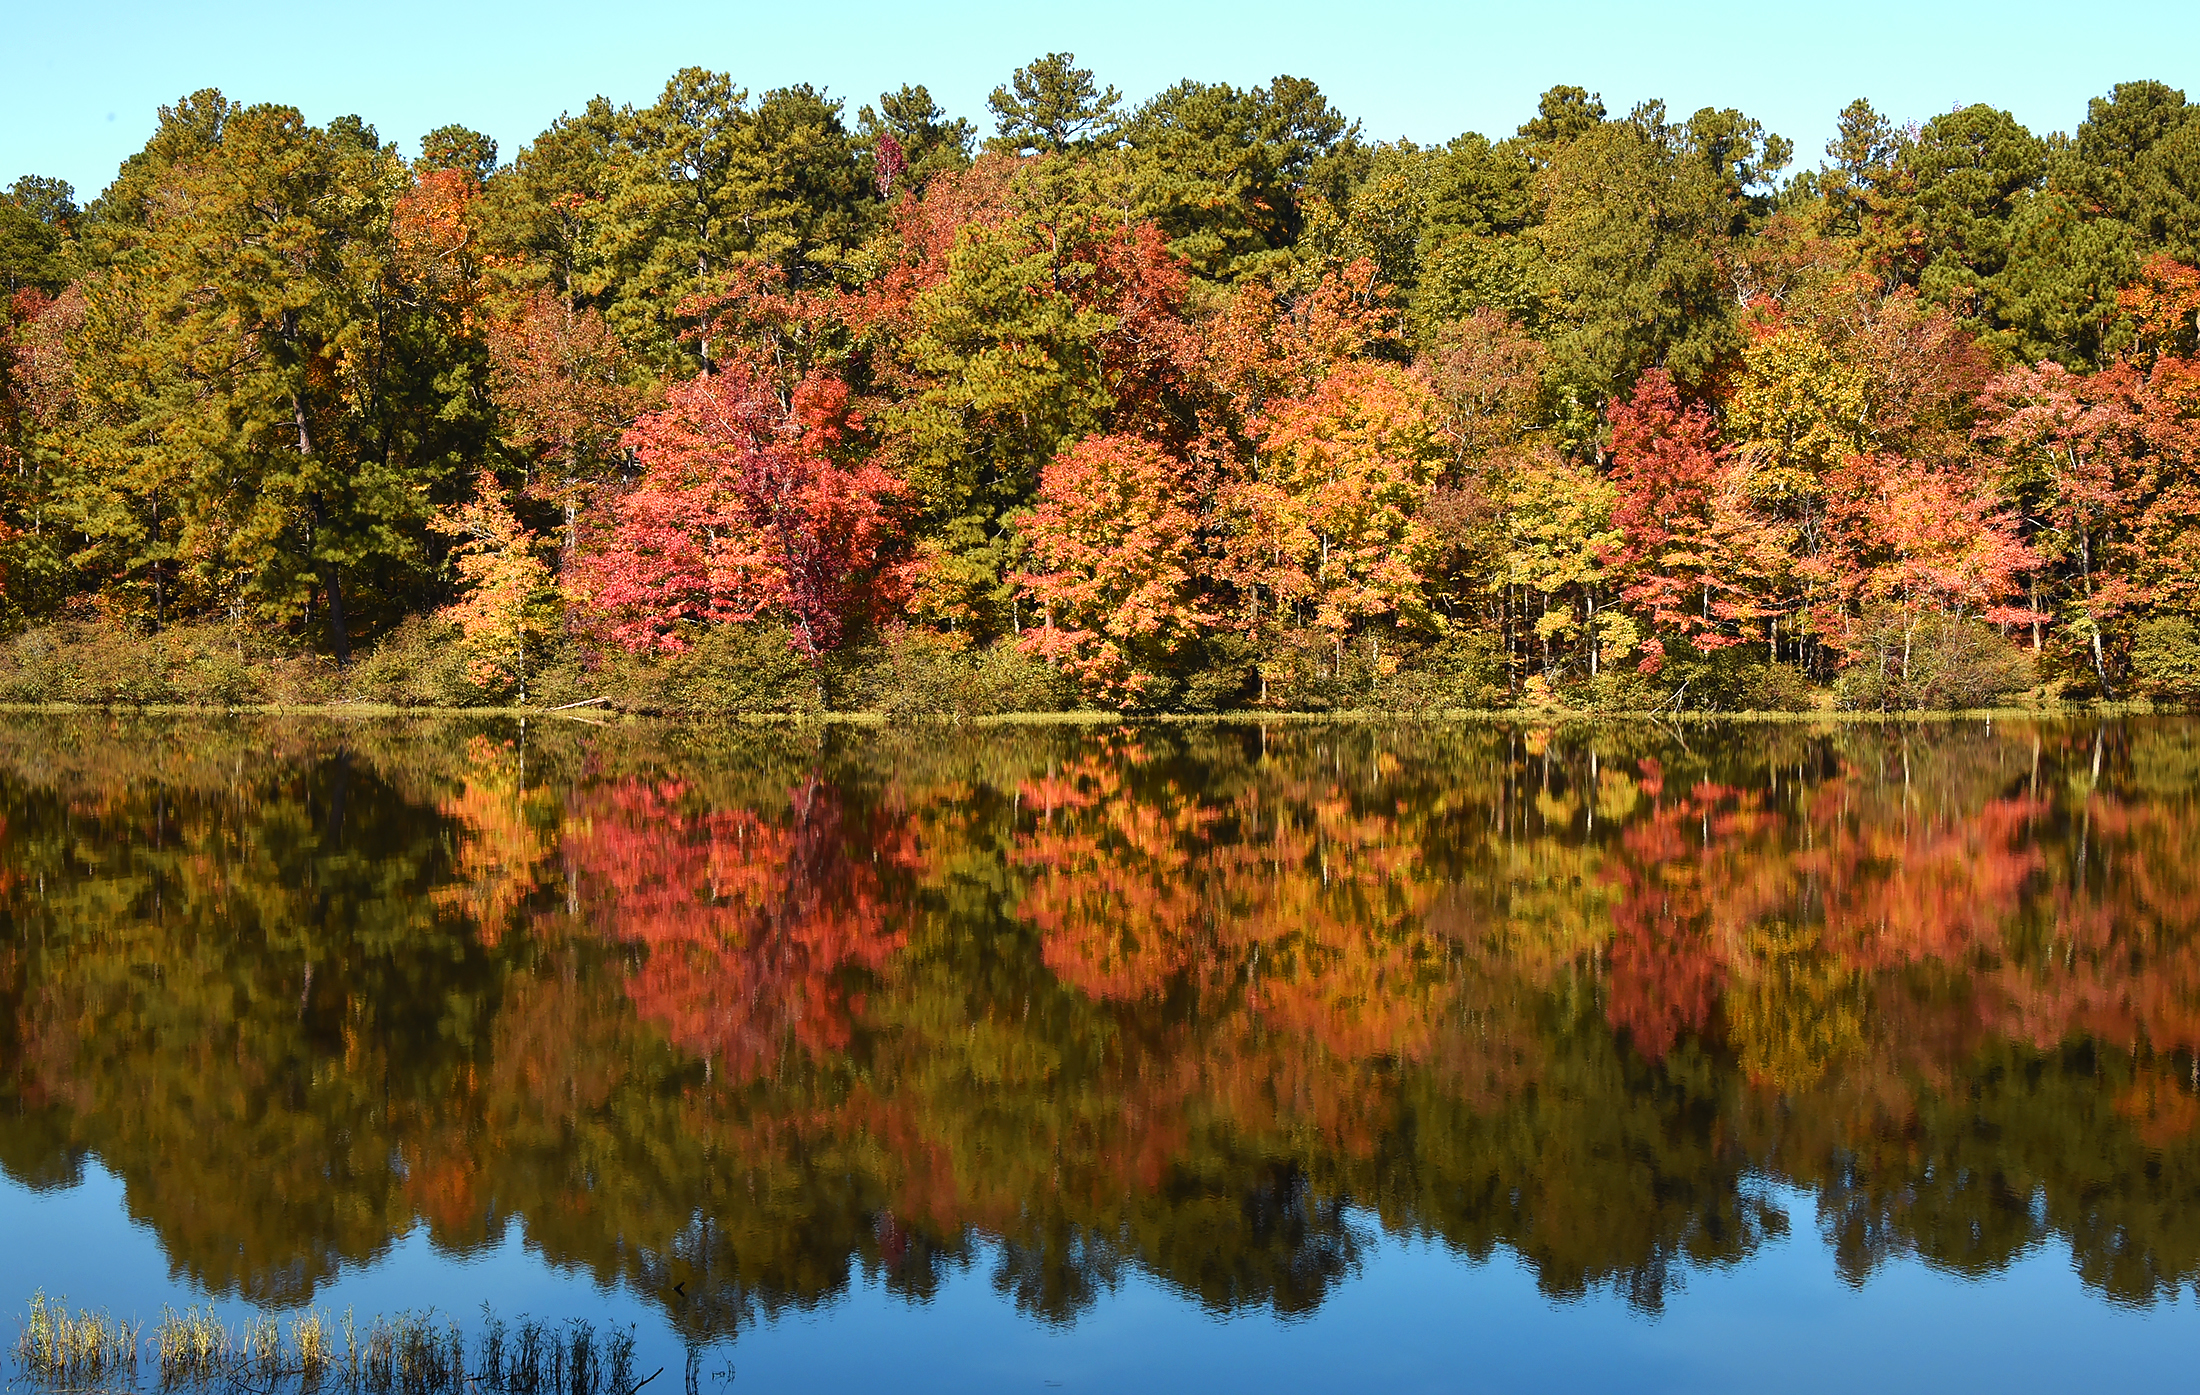 Fall Color on Display at Alabama's State Parks